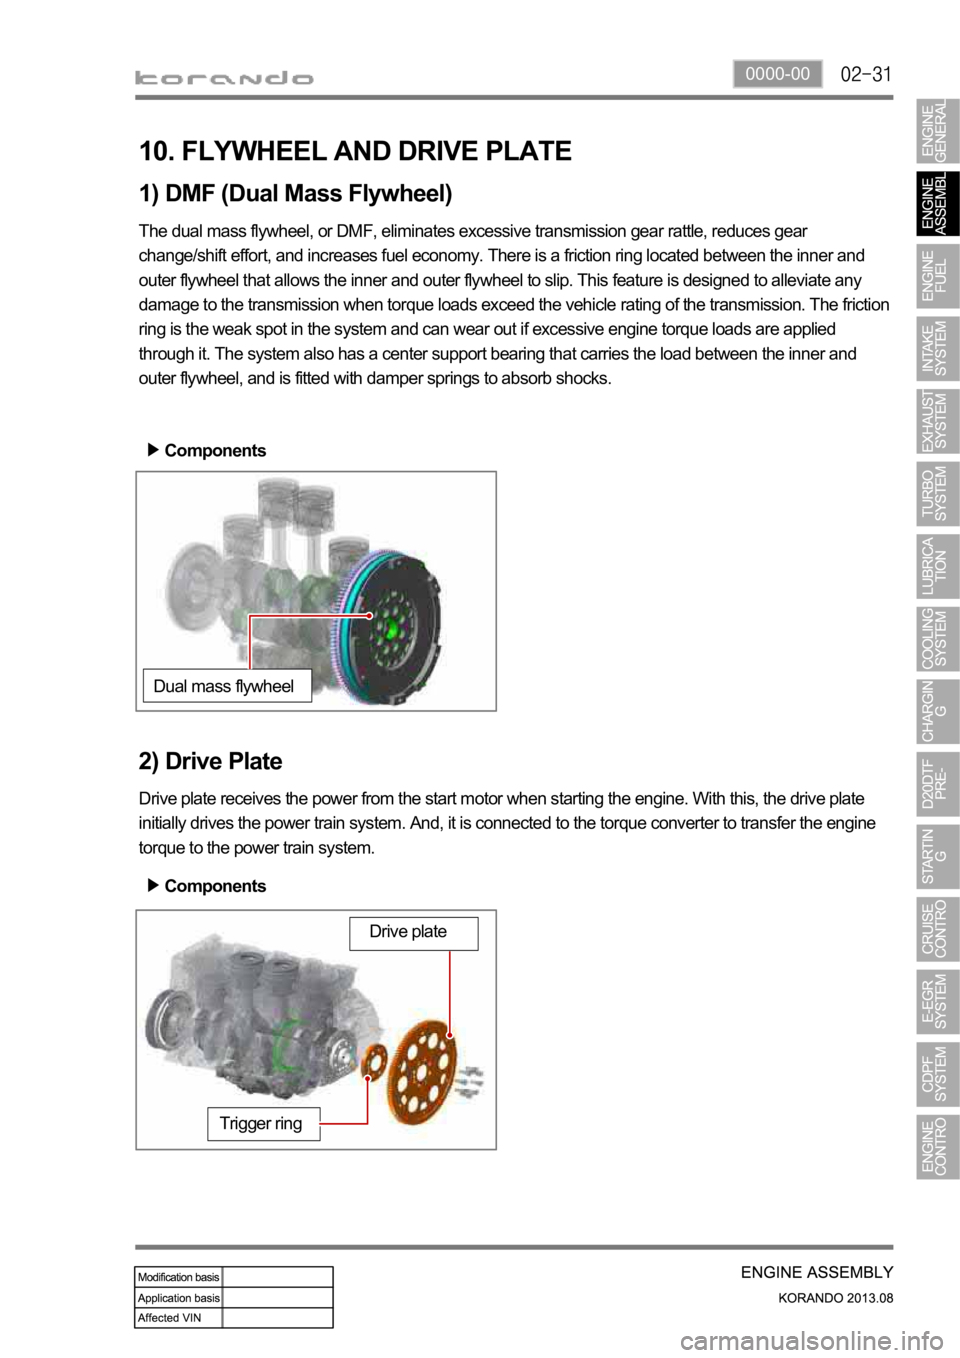 SSANGYONG KORANDO 2013  Service Manual 0000-00
10. FLYWHEEL AND DRIVE PLATE
1) DMF (Dual Mass Flywheel)
The dual mass flywheel, or DMF, eliminates excessive transmission gear rattle, reduces gear 
change/shift effort, and increases fuel ec